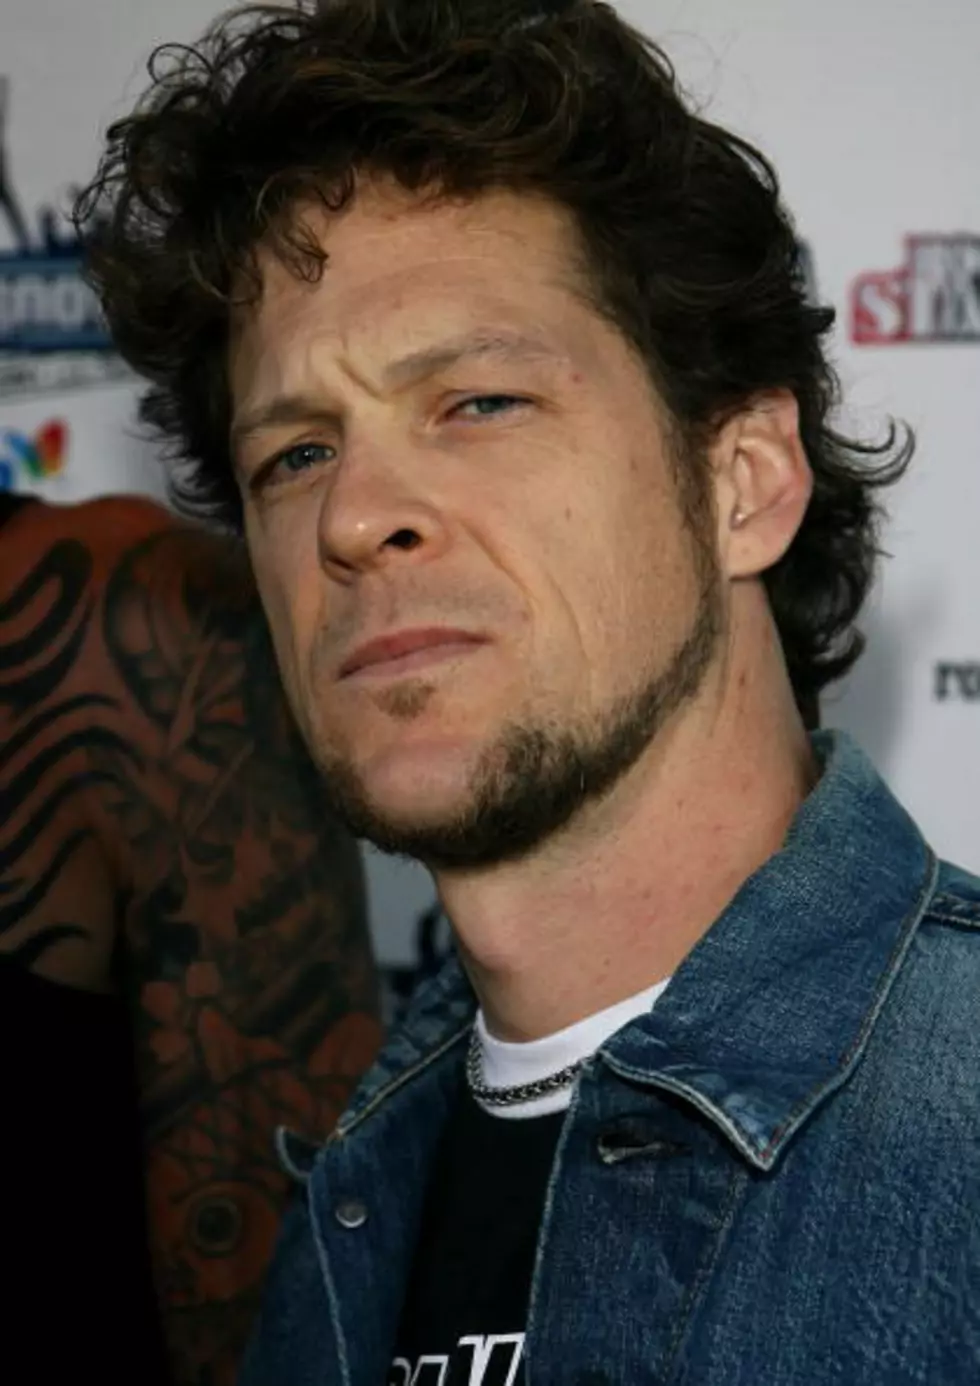 Jason Newsted Says “Hardwired” Is “Wicked”, Has Been Communicating With Metallica